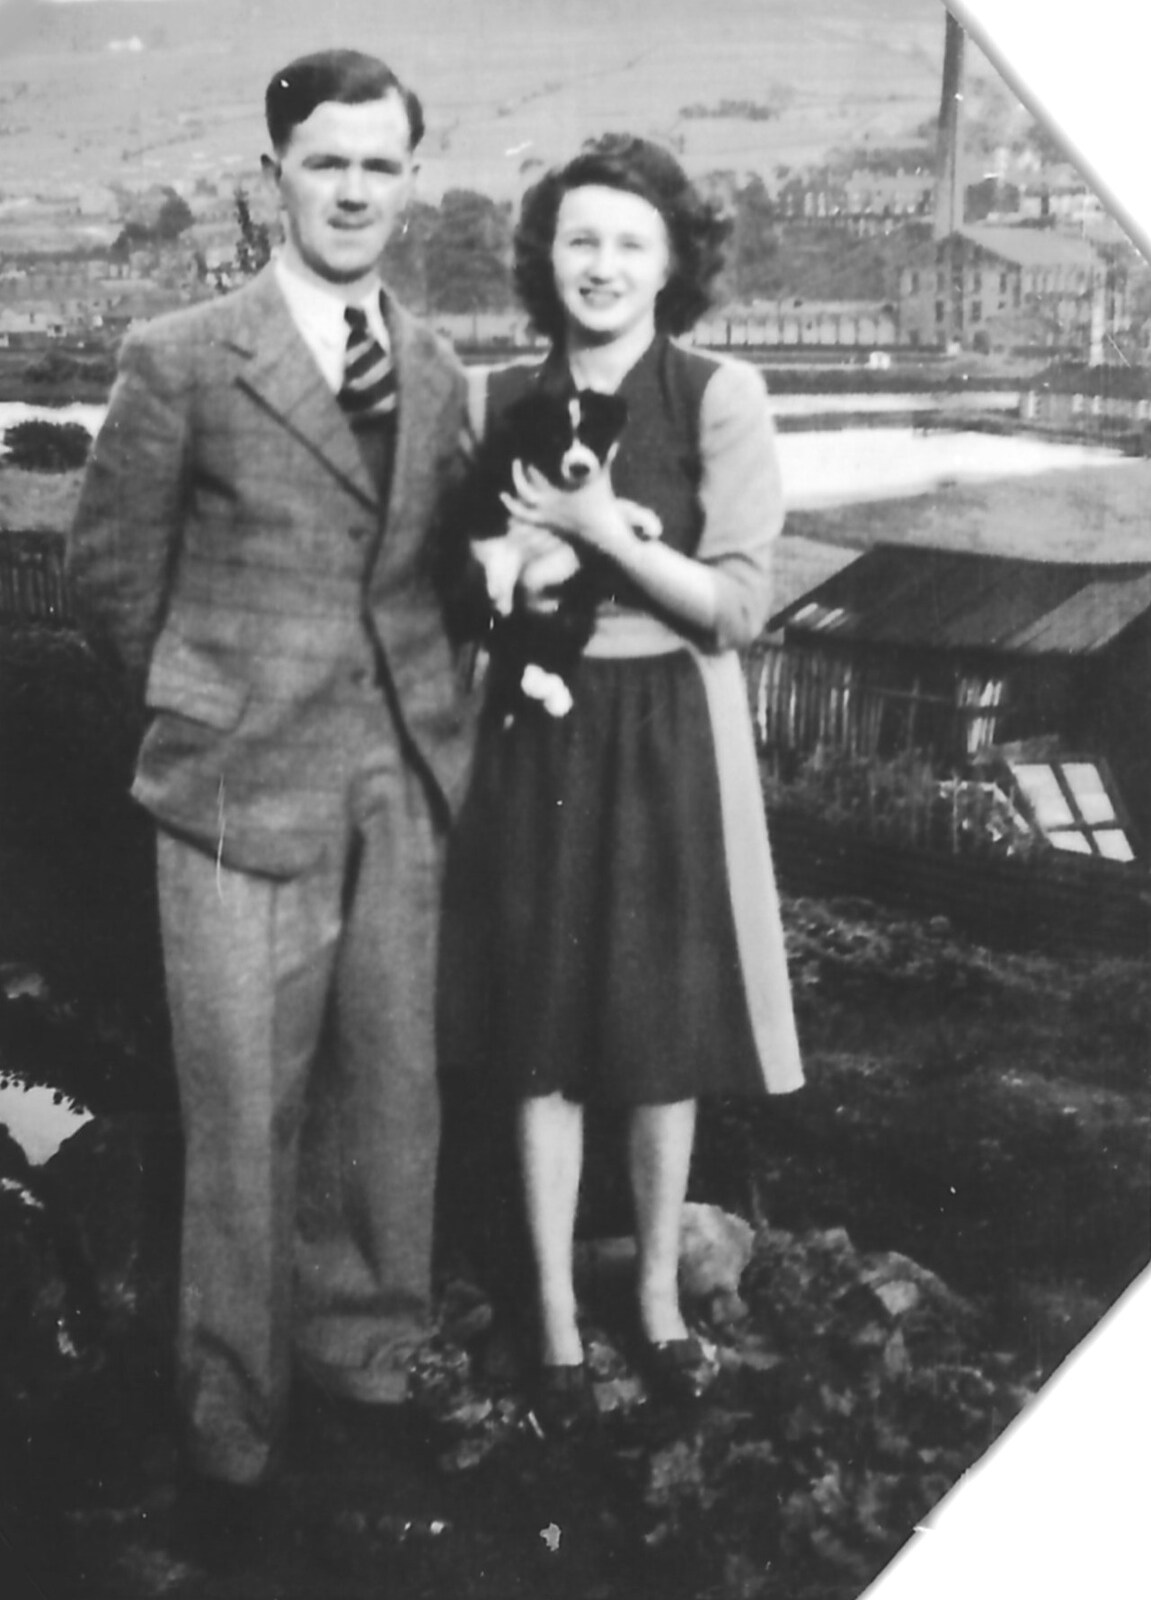 Joseph and Margaret, with Raff as a puppy, Rawtenstall from Family History: The 1940s and 1950s - 24th January 2020